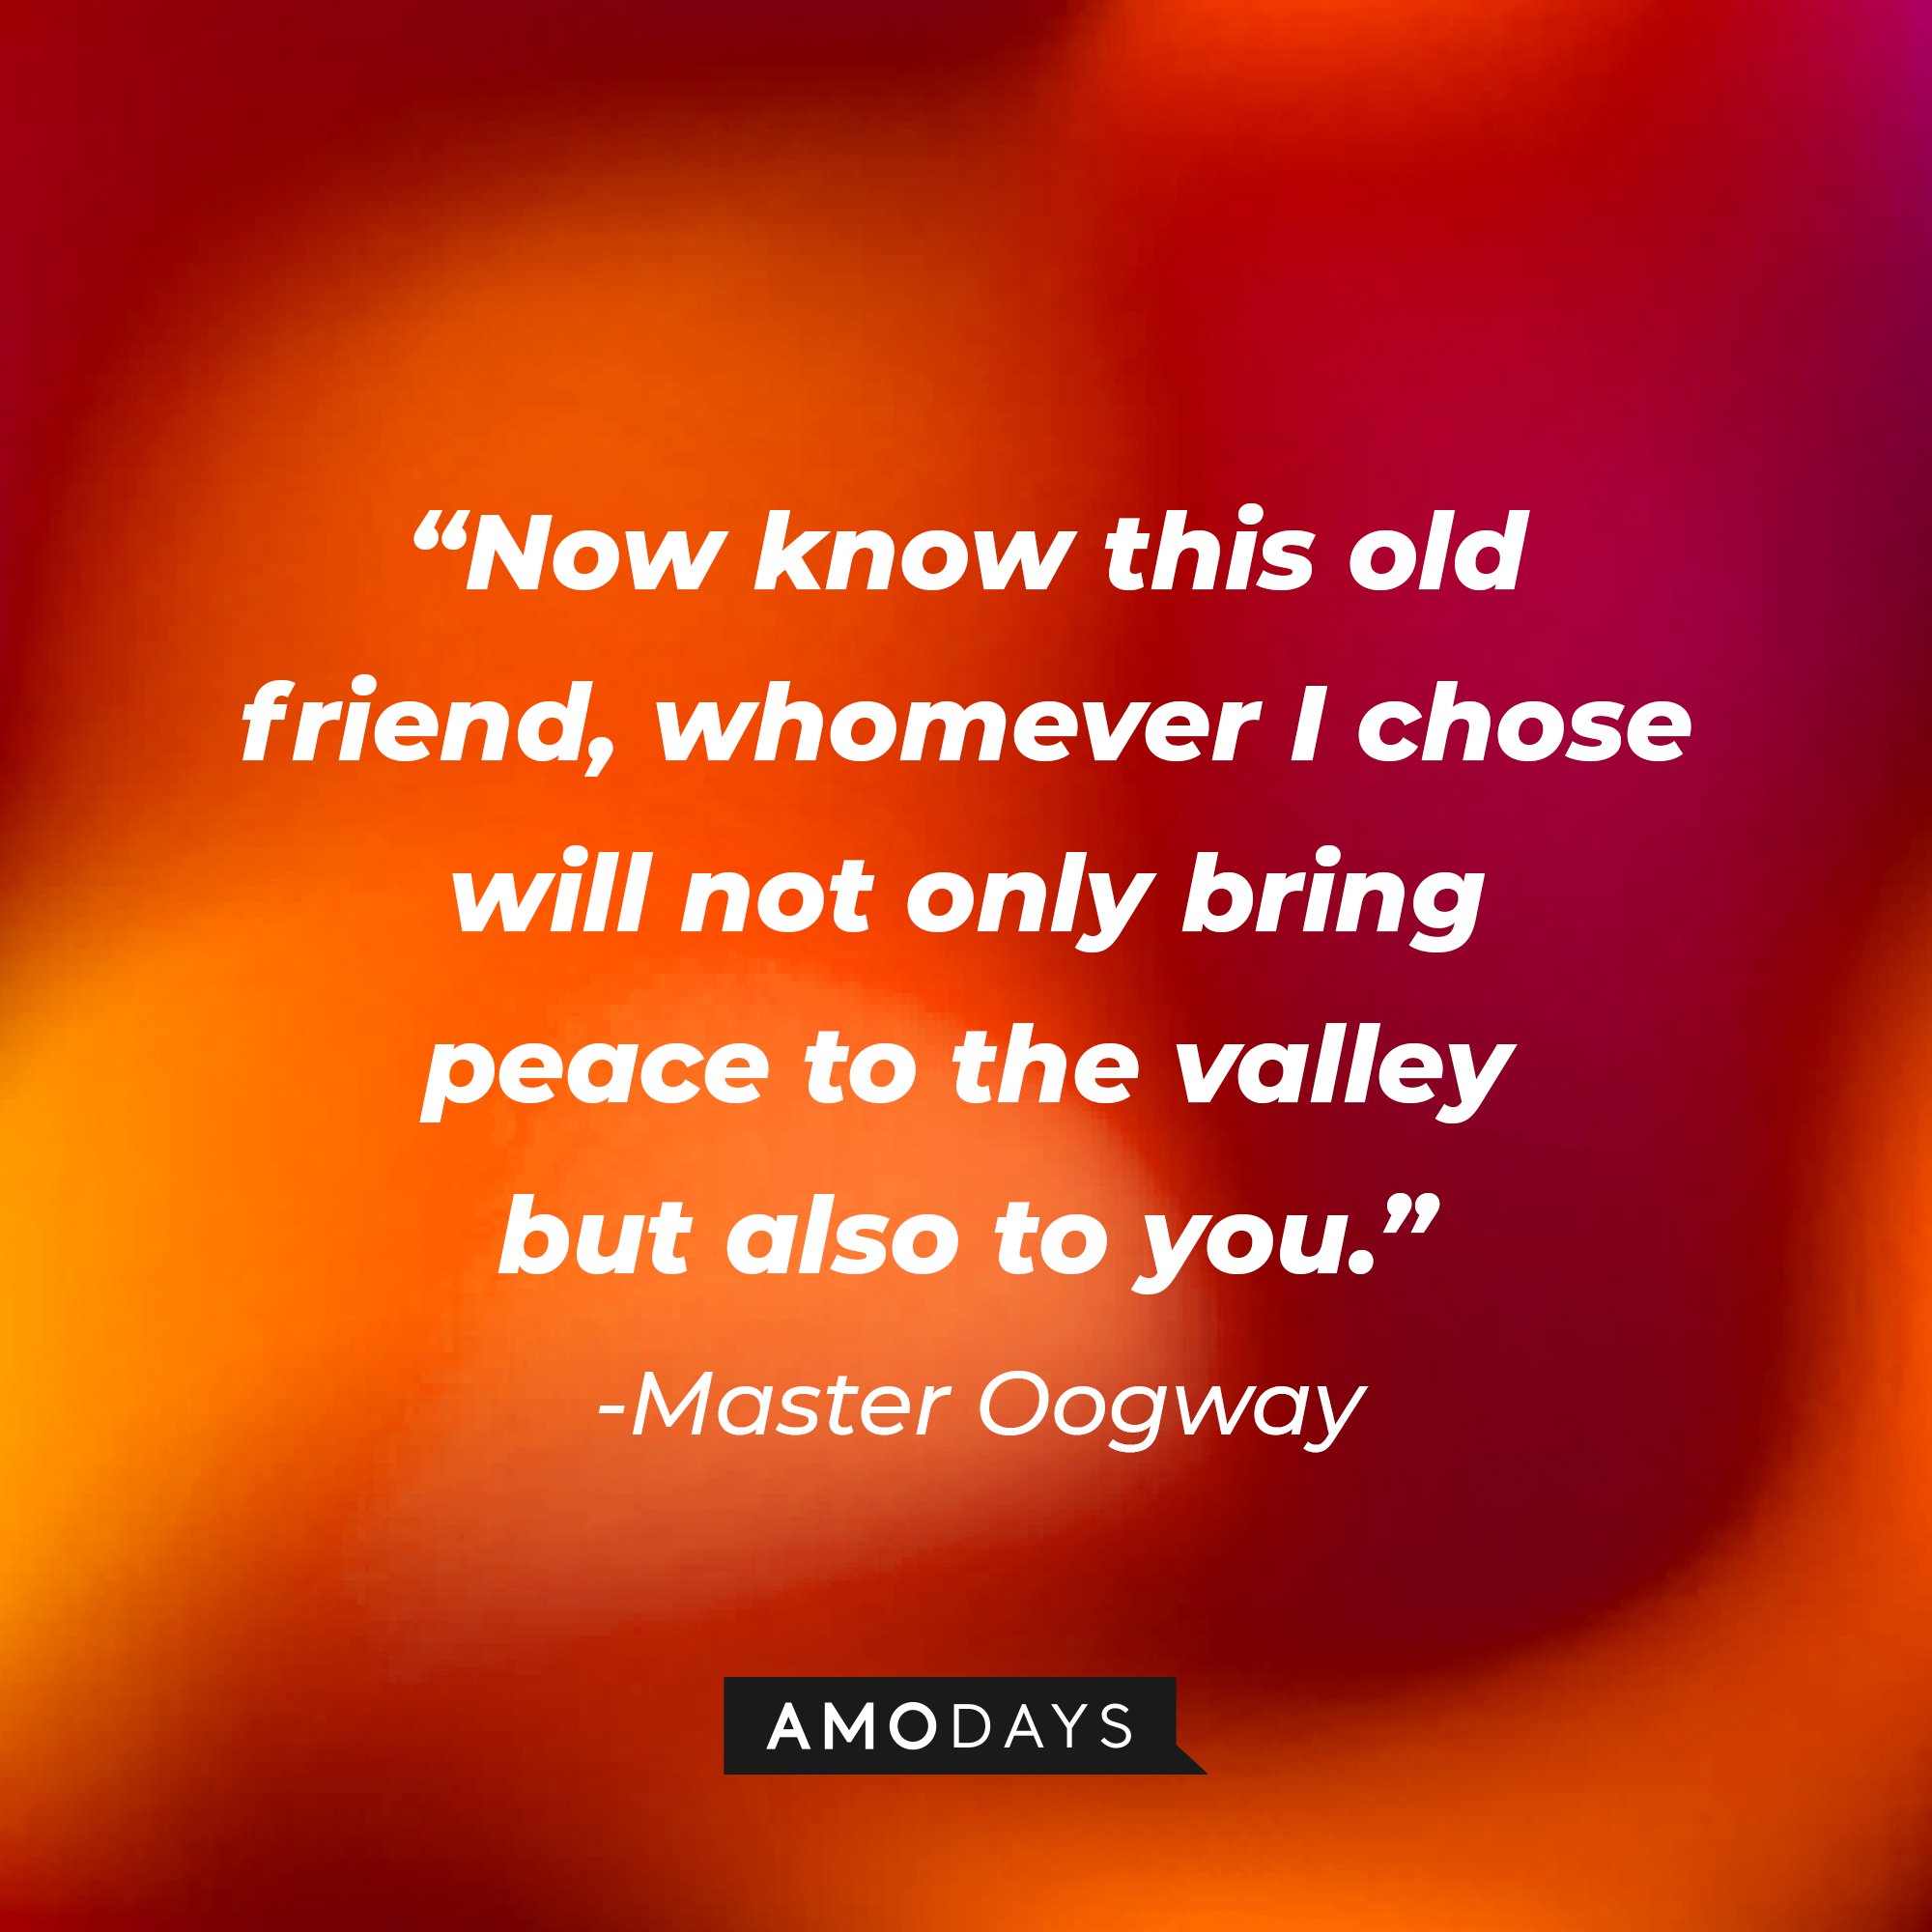 Master Oogway's quote: “Now know this old friend, whomever I chose will not only bring peace to the valley but also to you.” | Image: AmoDays